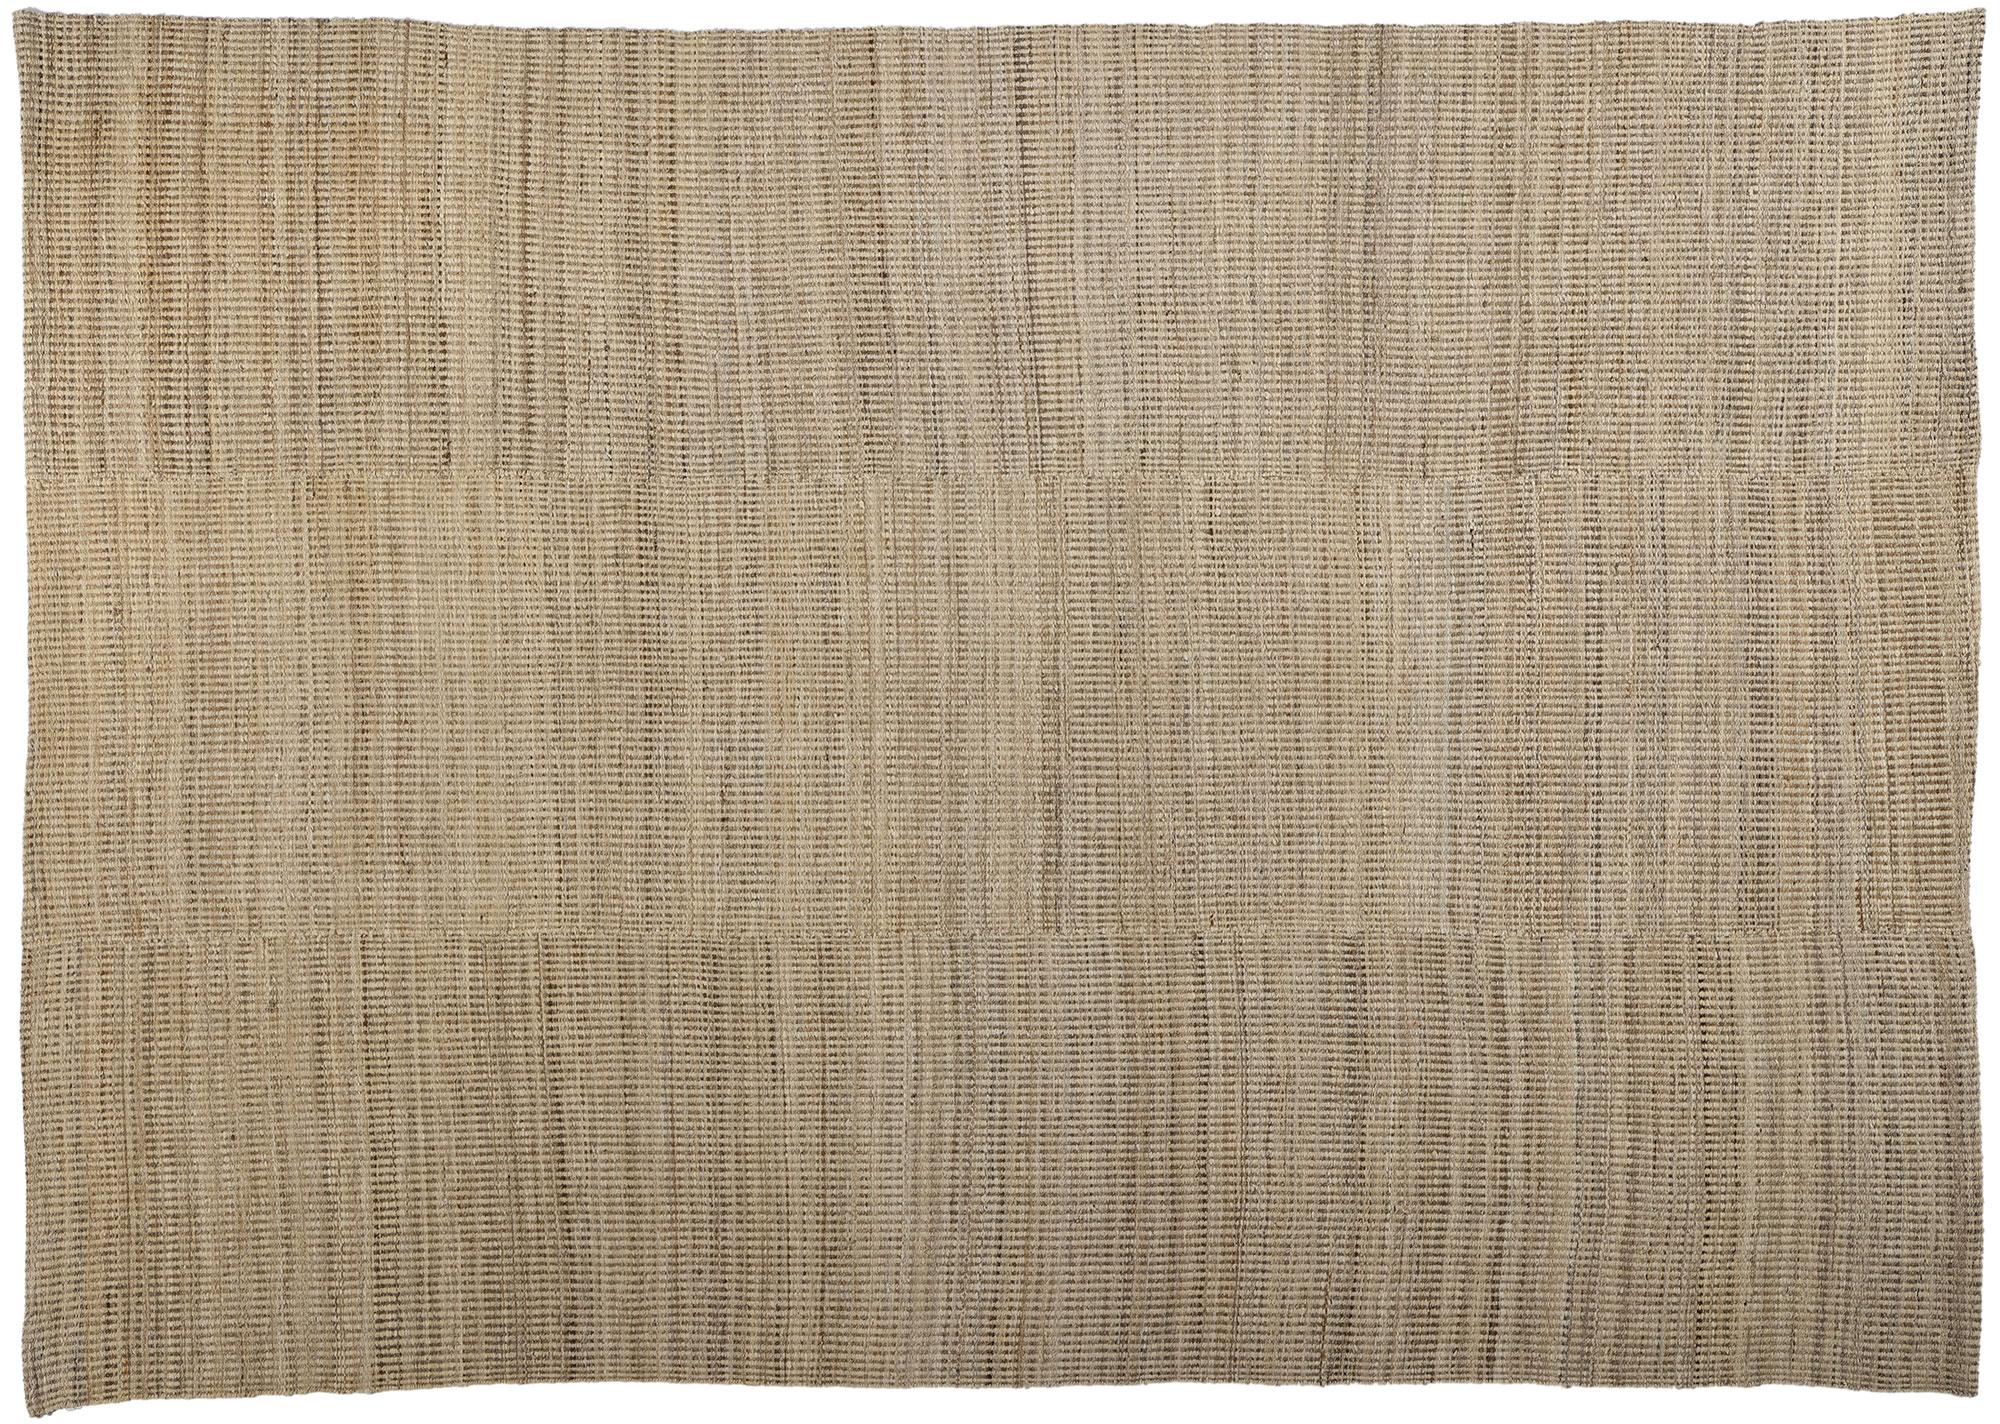 81100 Modern Neutral Earth-Tone Kilim Rug, 08'05 x 12'00. Embrace a sense of serenity and tranquility with our handwoven modern neutral kilim rug. A captivating fusion of organic modernity and beach house charm, this flatweave rug is meticulously